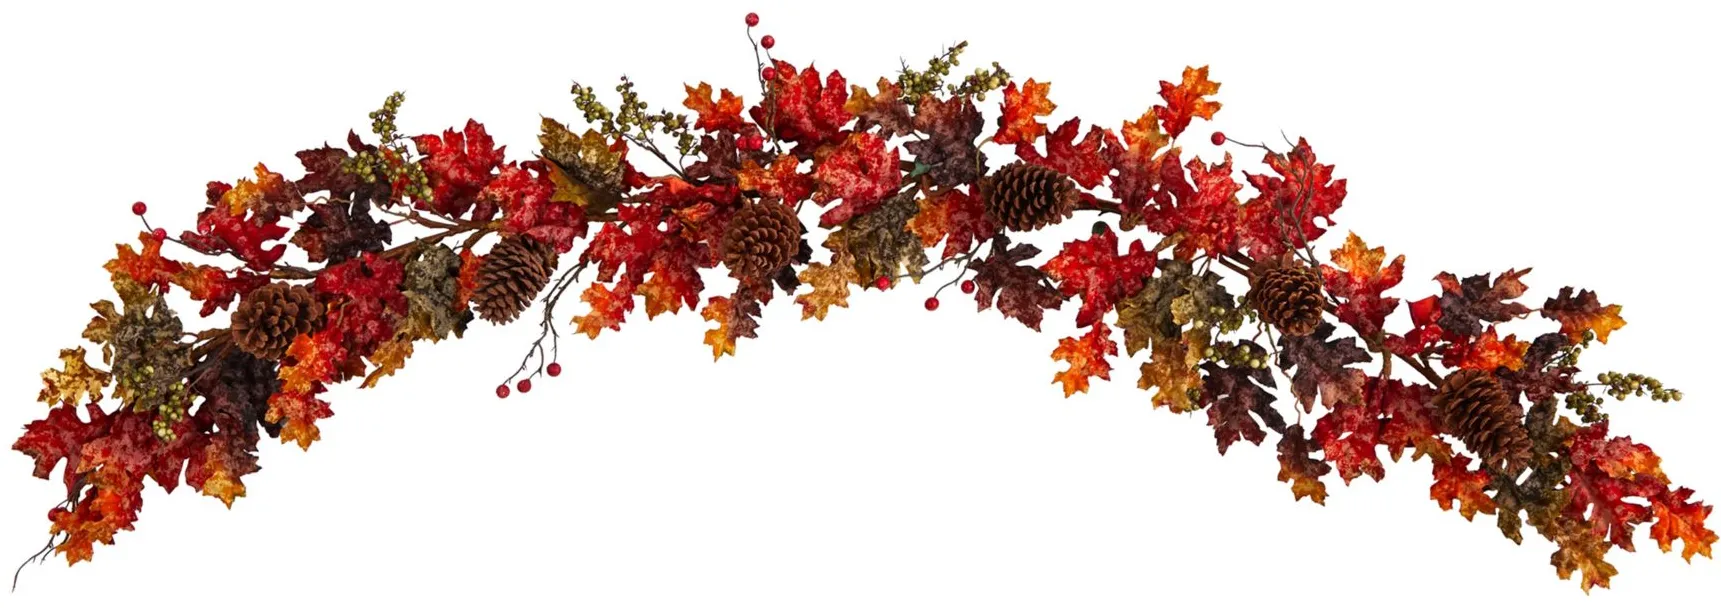 Crisp 6ft Maple Leaves and Pinecones Garland in Orange by Bellanest